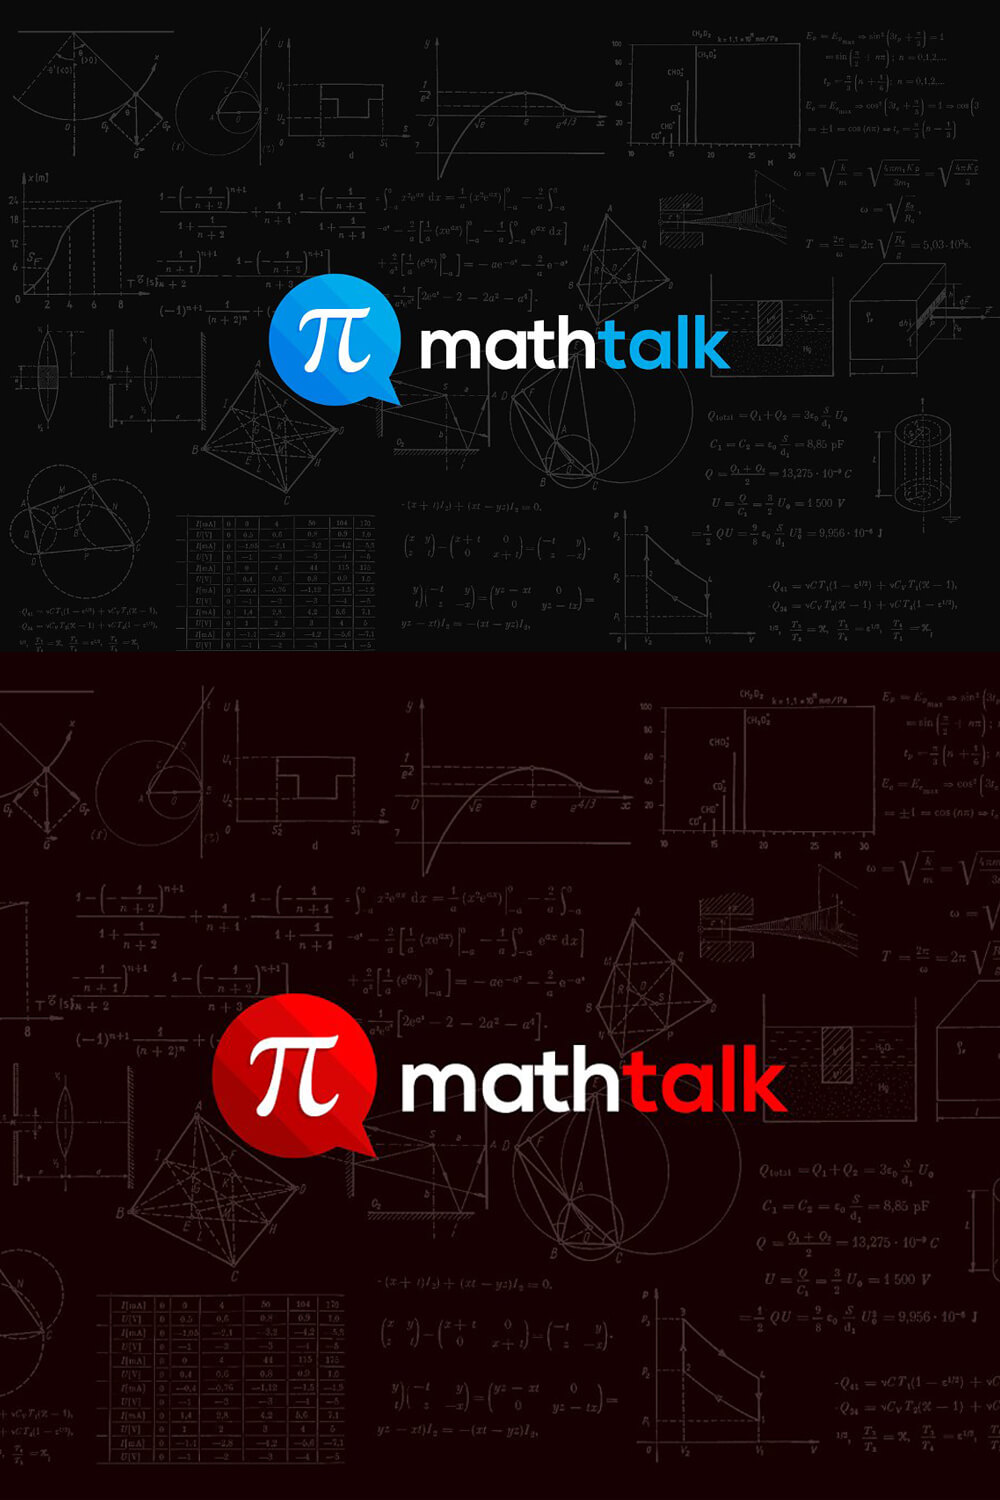 Two Math Talk Logos in red-white, blue-white colors on a black background with blueprints.